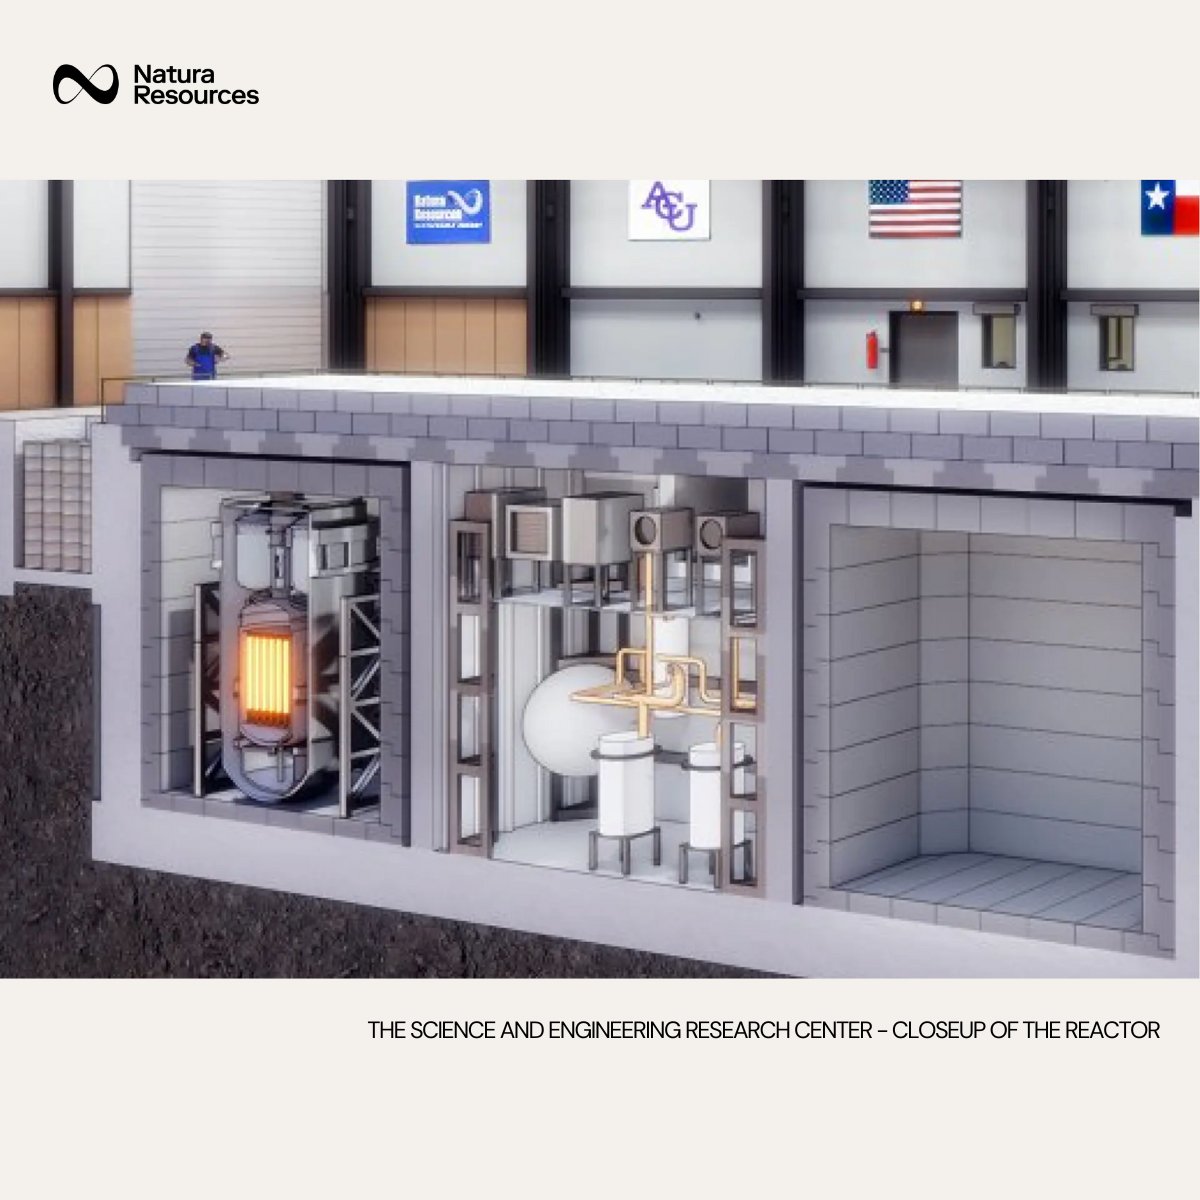 The first deployment of a Natura Resources'  Molten Salt Research Reactor will demonstrate successful licensure of a liquid-fueled reactor with the Nuclear Regulatory Commission (NRC).

naturaresources.com/development

#moltensaltreactor #cleanenergy #energytransition #advancednuclear